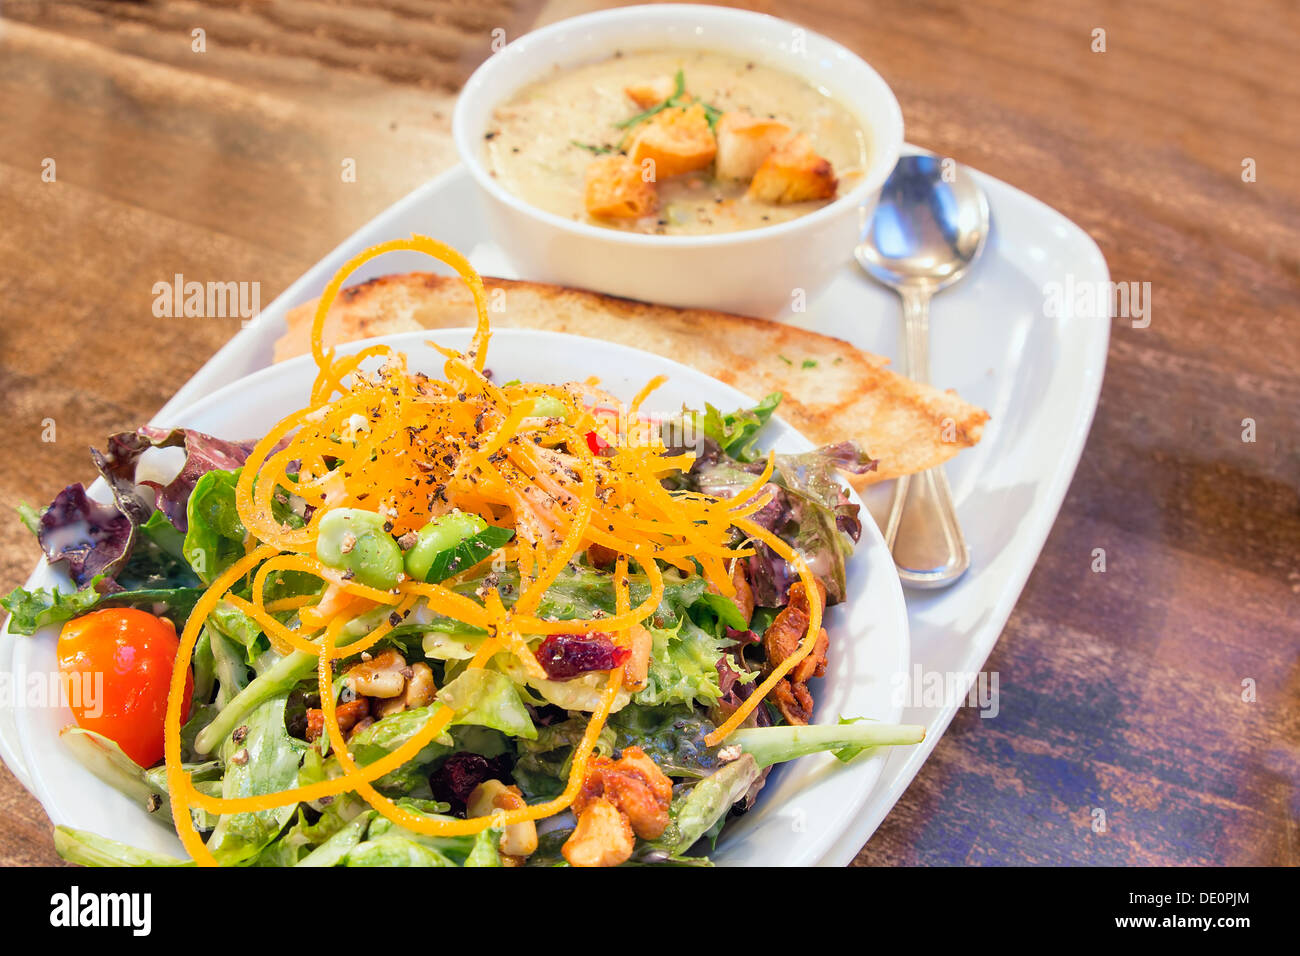 Spring Green Salad with Edamame Tomato Cashews Cranberries and Bowl of Corn Chowder Soup Closeup Stock Photo